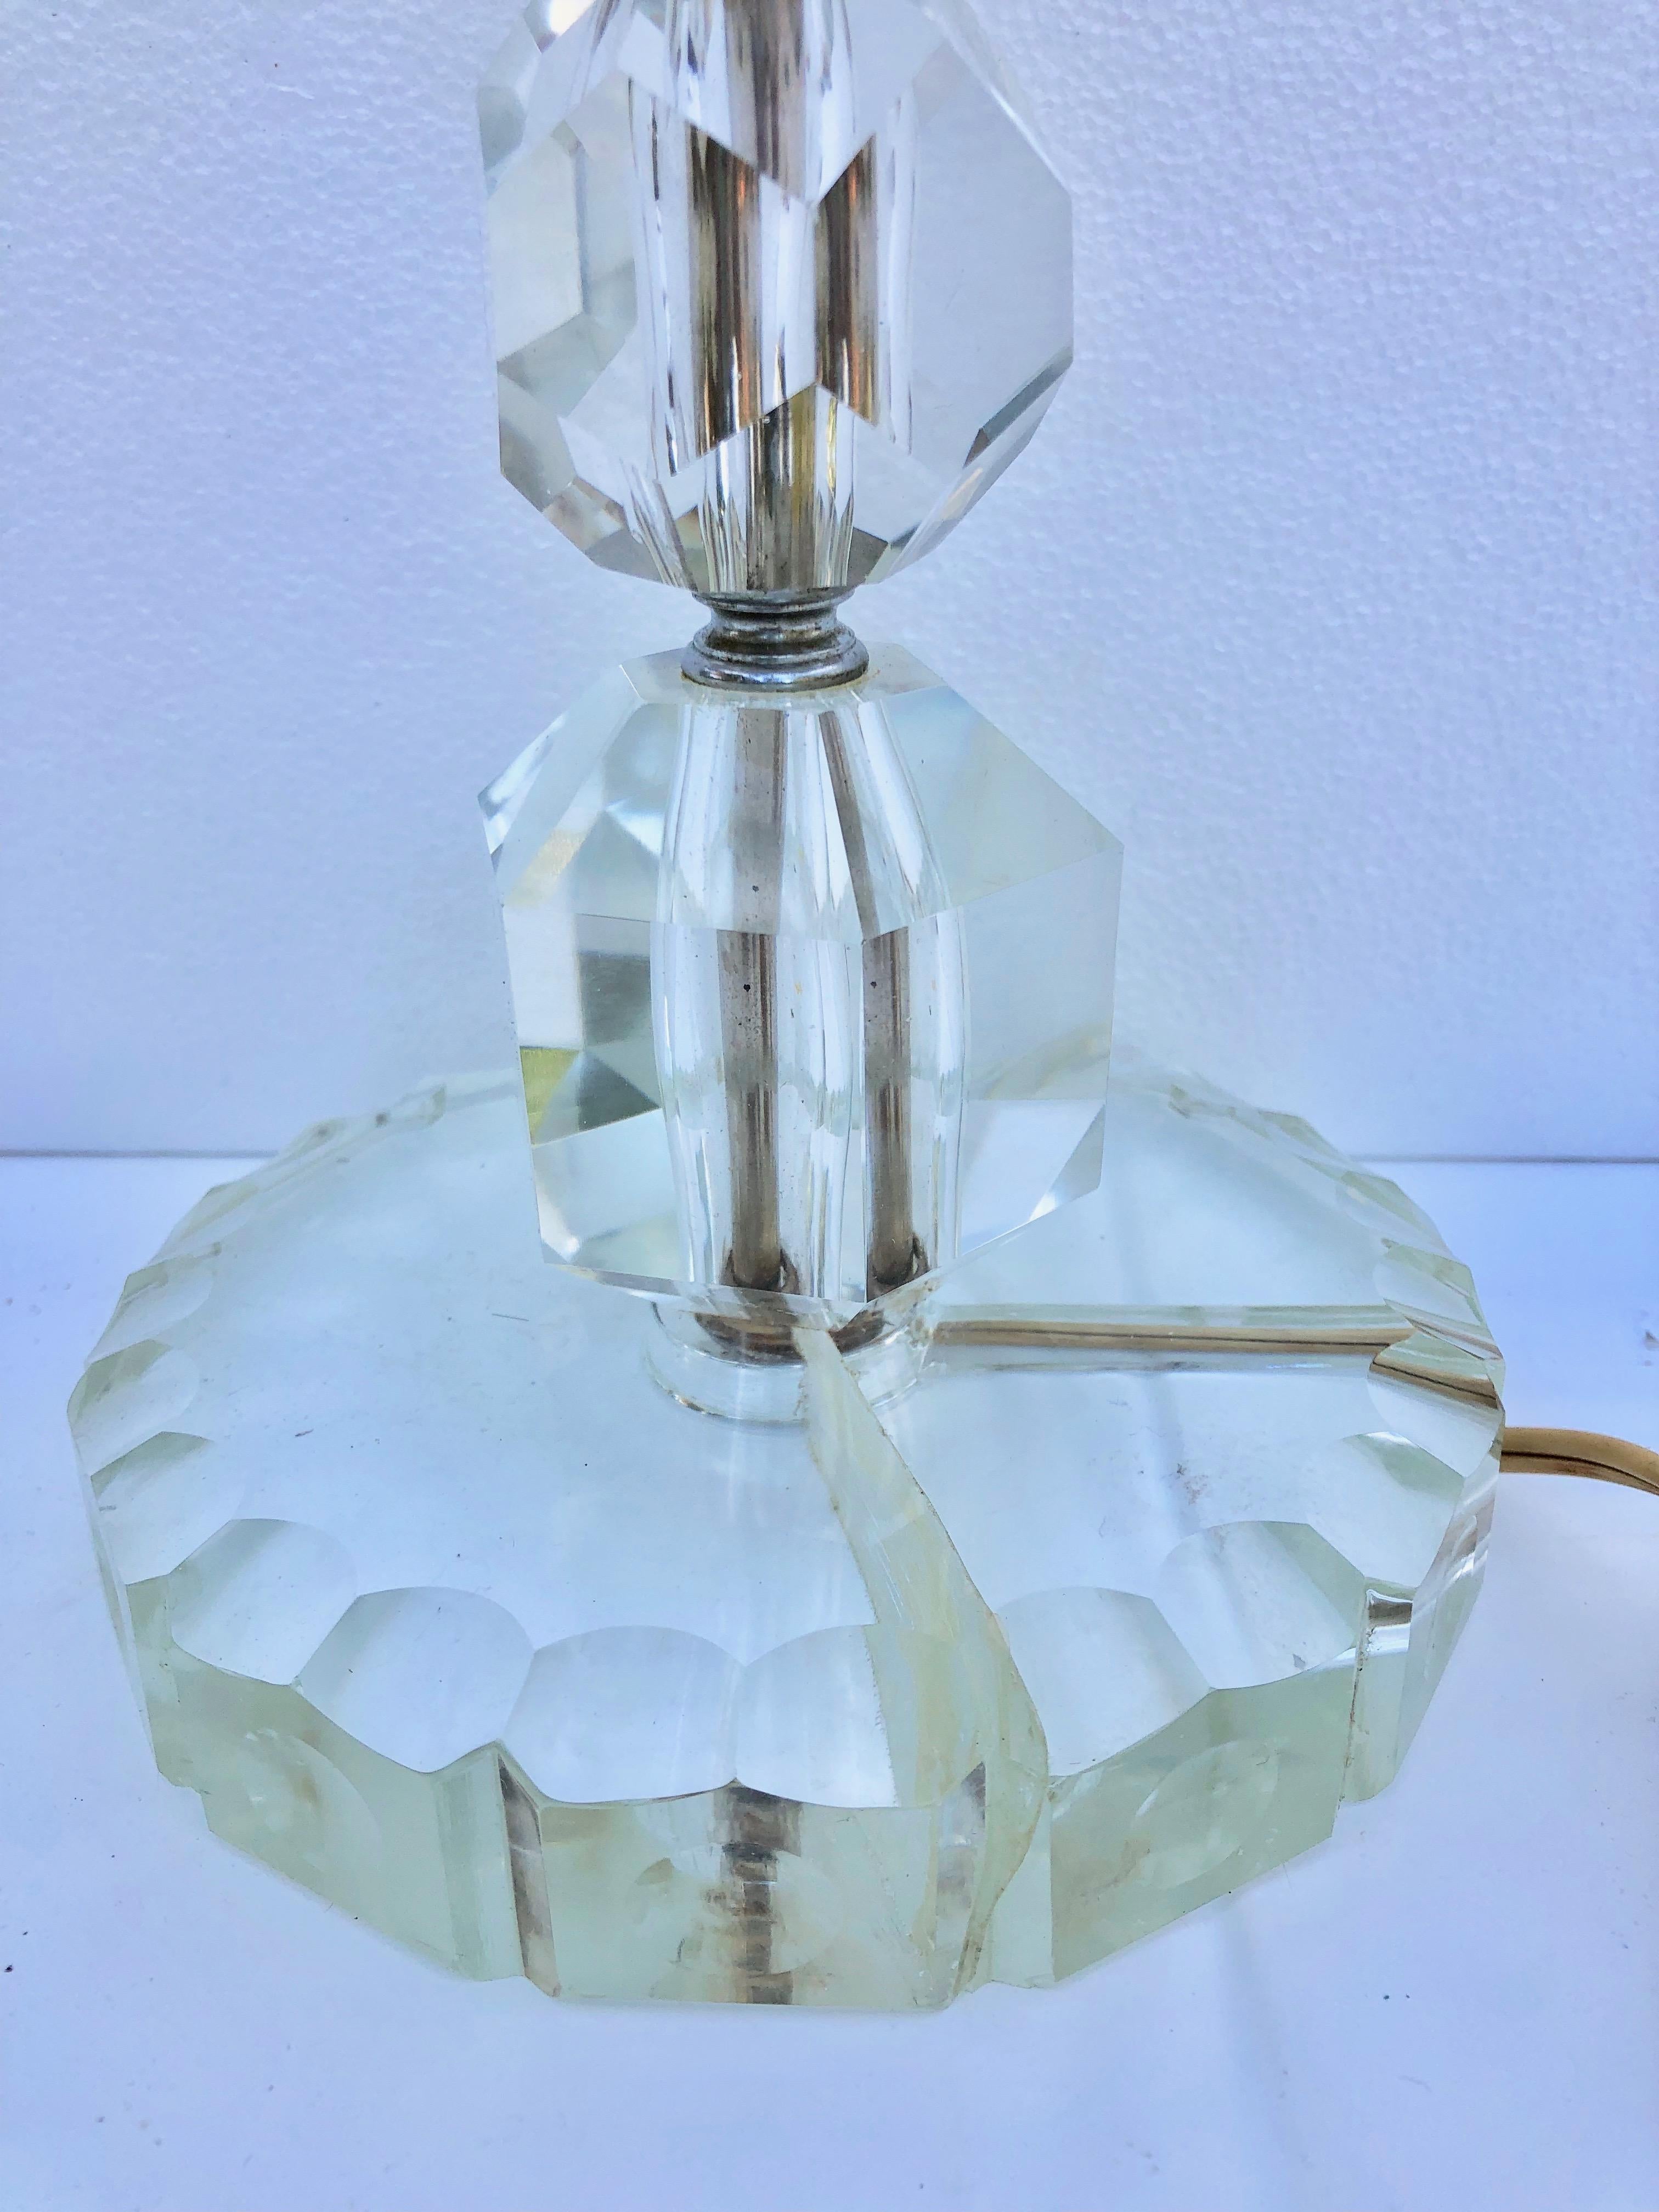 This is a lovely glass lamp with French antique hanging crystals. It comes with its shade support and is wired for USA. It is a tall lamp which could support a substantial shade. It would add elegantly lighting to a living room, hall or